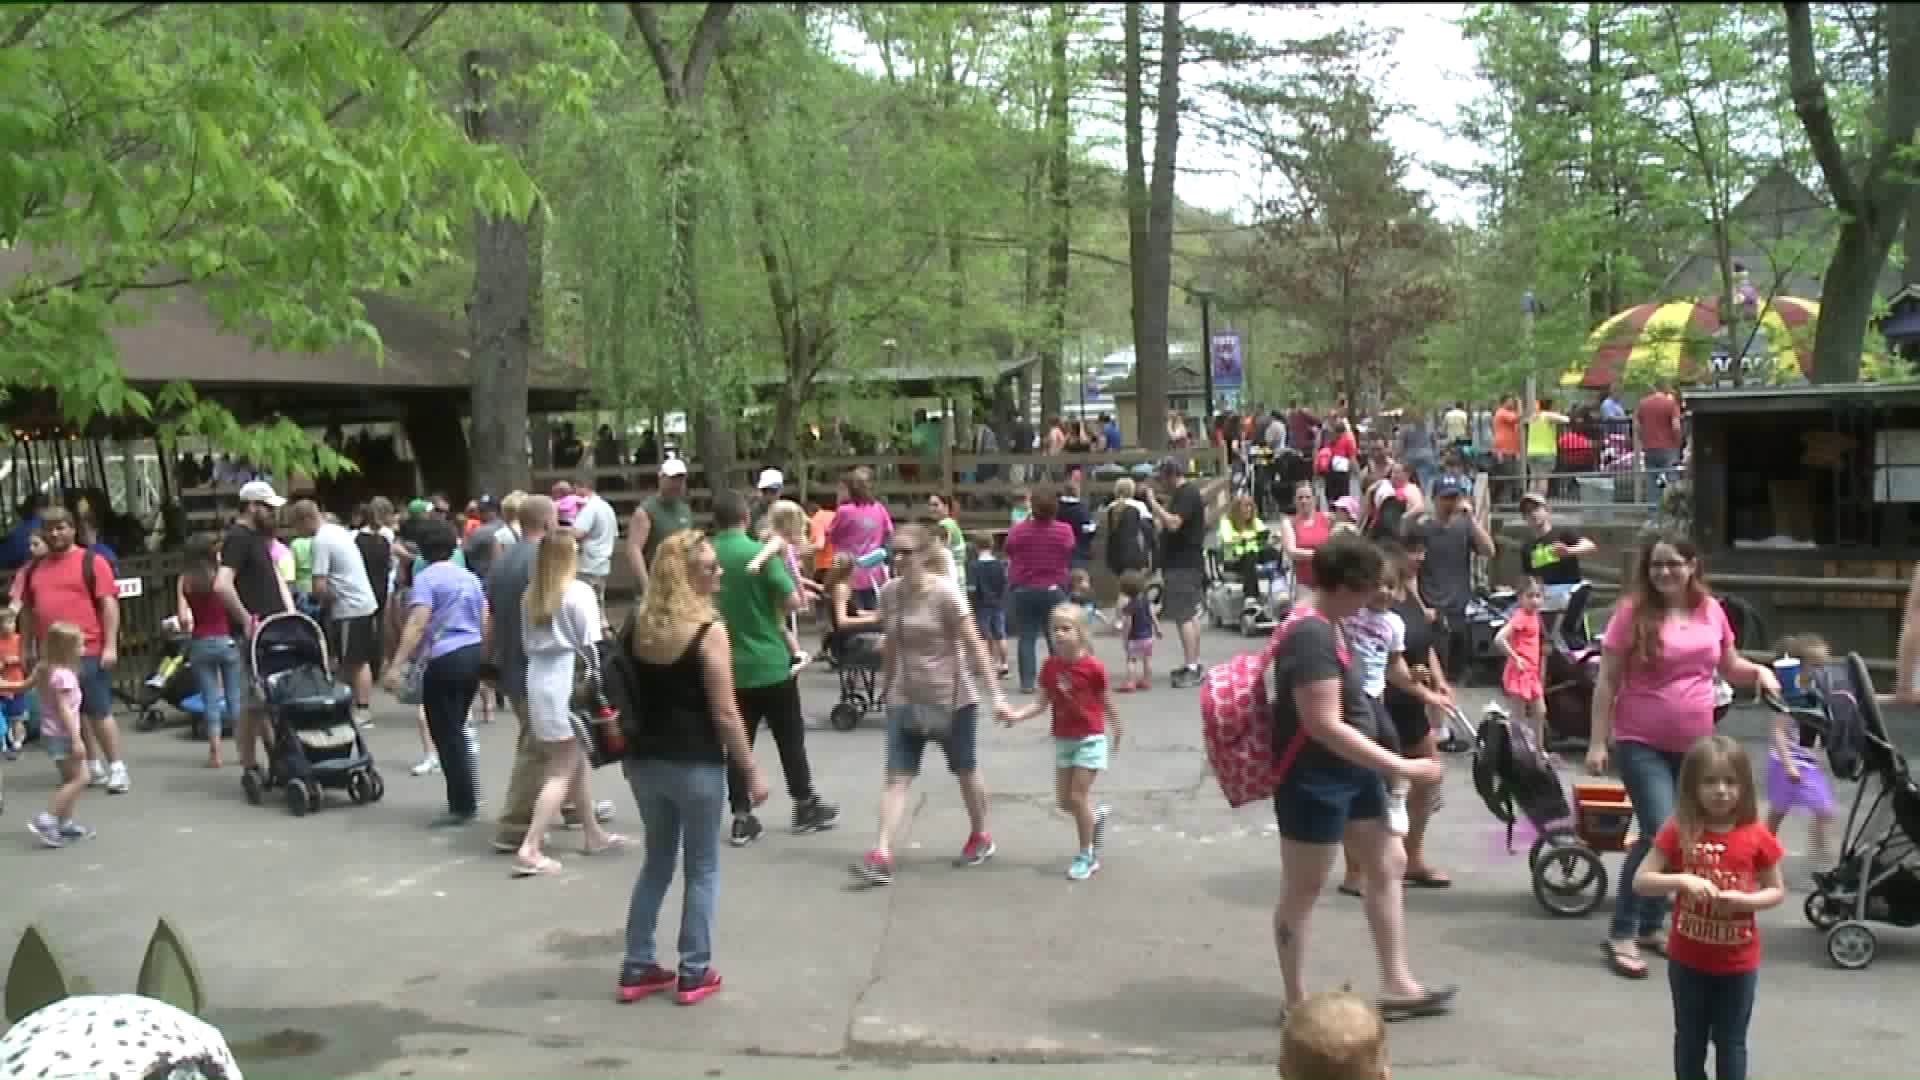 Big Crowd on Opening Day at Knoebels